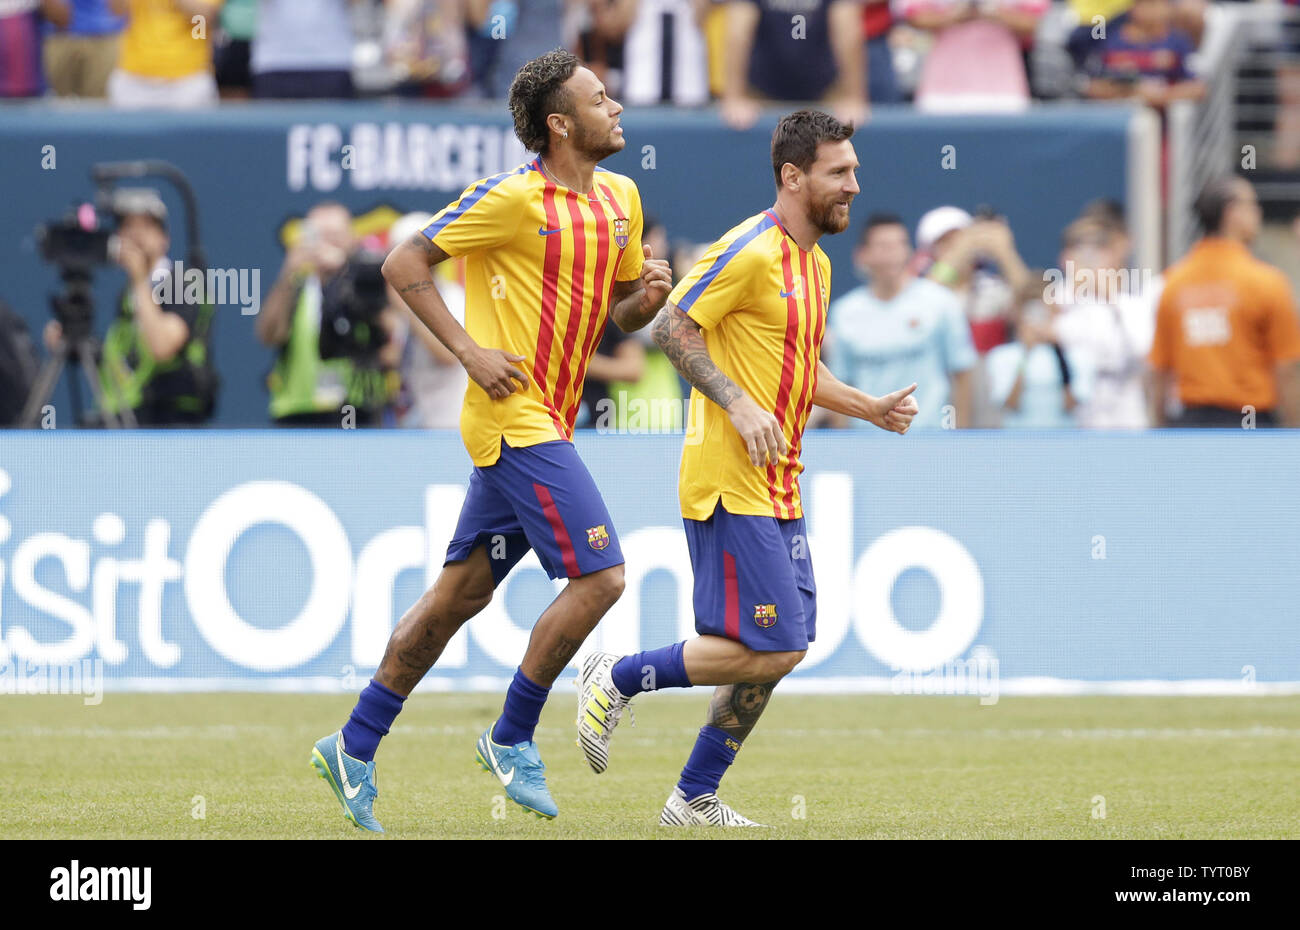 Lionel Messi and Neymar of Barcelona take the field before the game against  Juventus at The International Champions Cup at Metlife Stadium in East  Rutherford, New Jersey on July 22, 2017. Photo